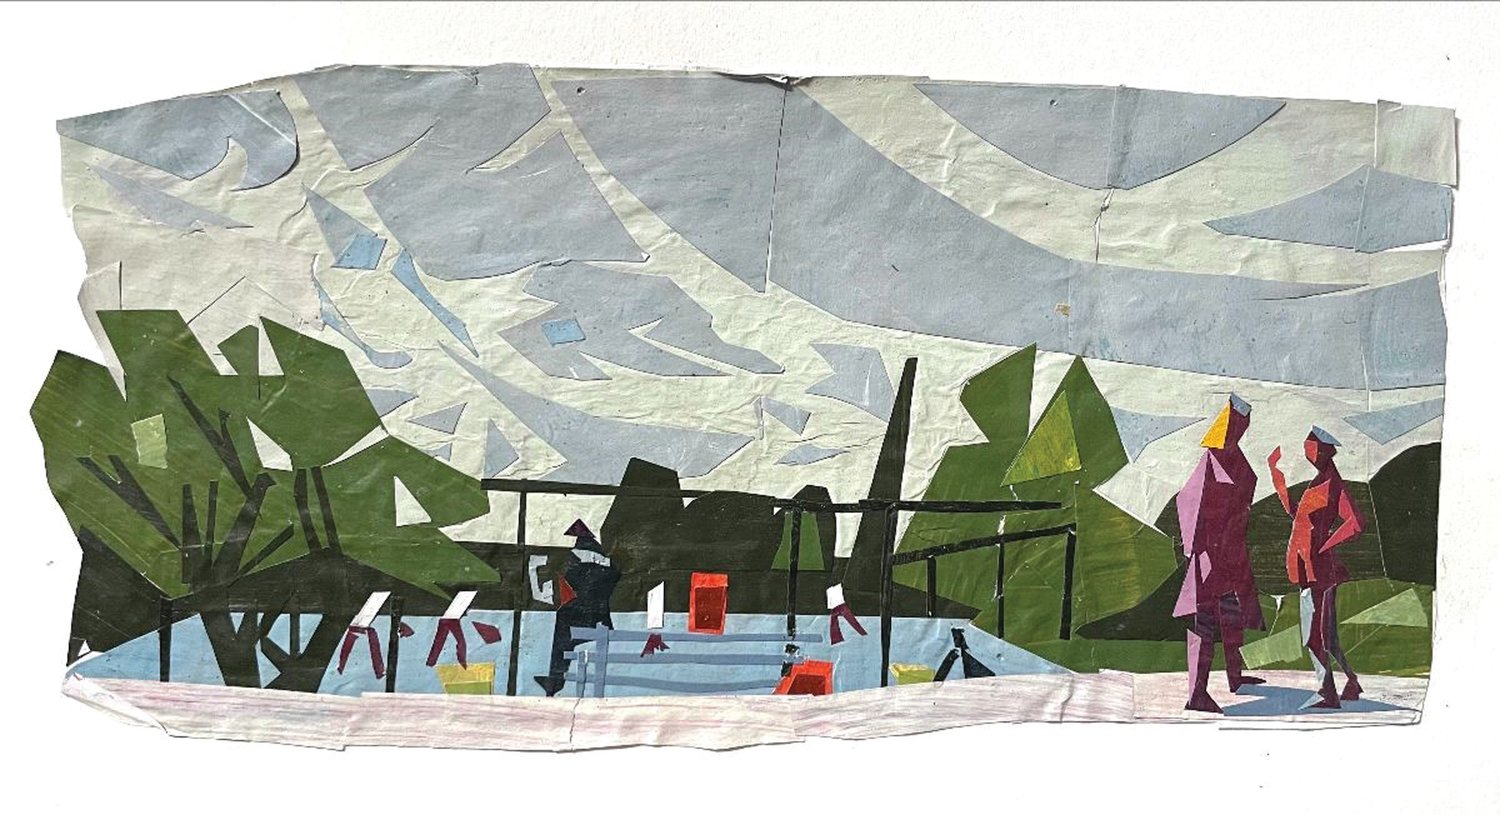 “Tennis Practice” is a painted paper collage by Alex Cohen, on view at George School’s gallery at Walton Center.